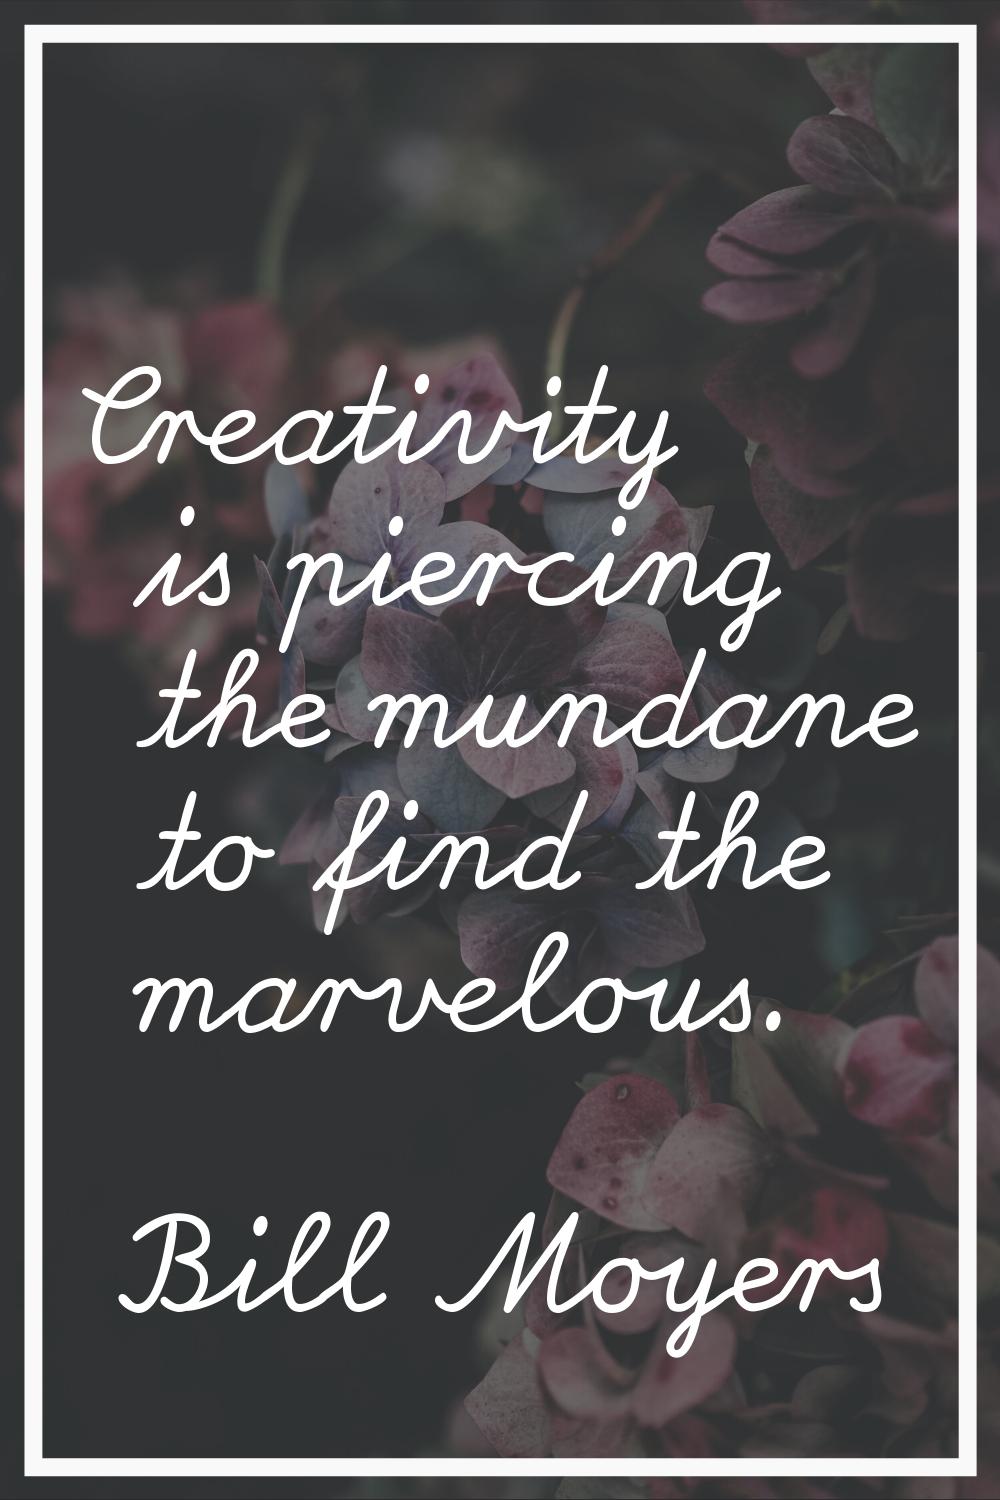 Creativity is piercing the mundane to find the marvelous.